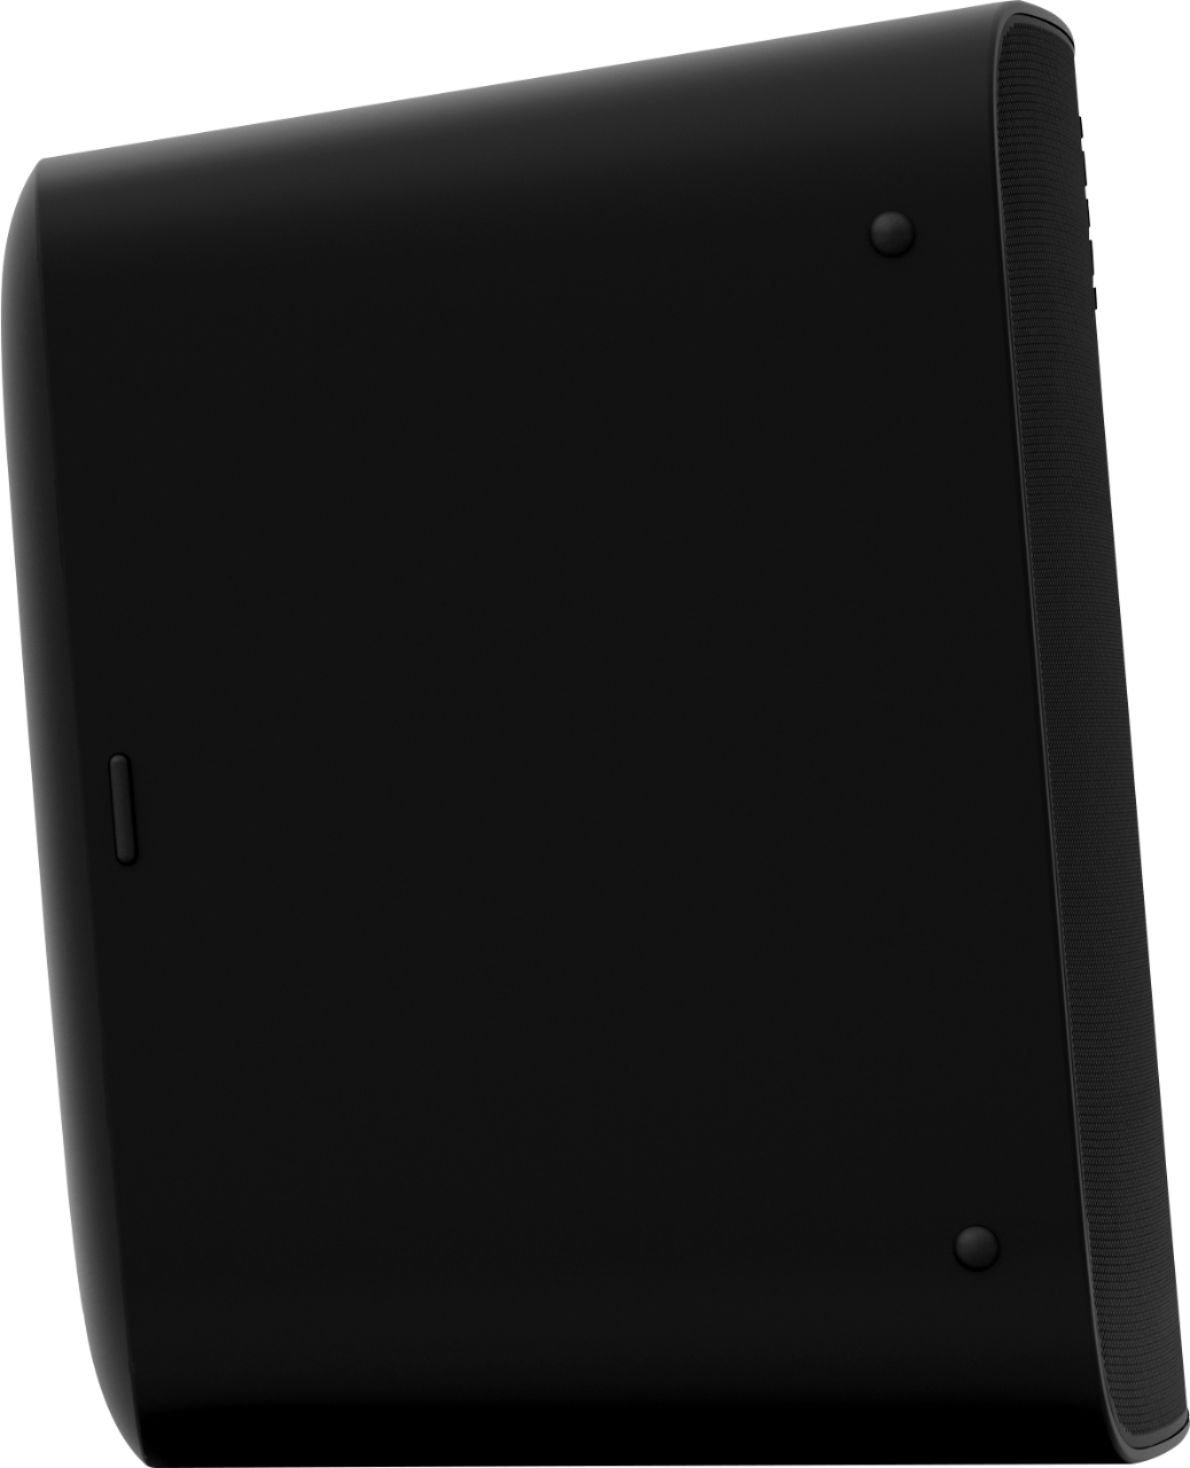 Angle View: Bluesound - Pulse 2i Hi-Res Wireless Streaming Speaker - Matte Black